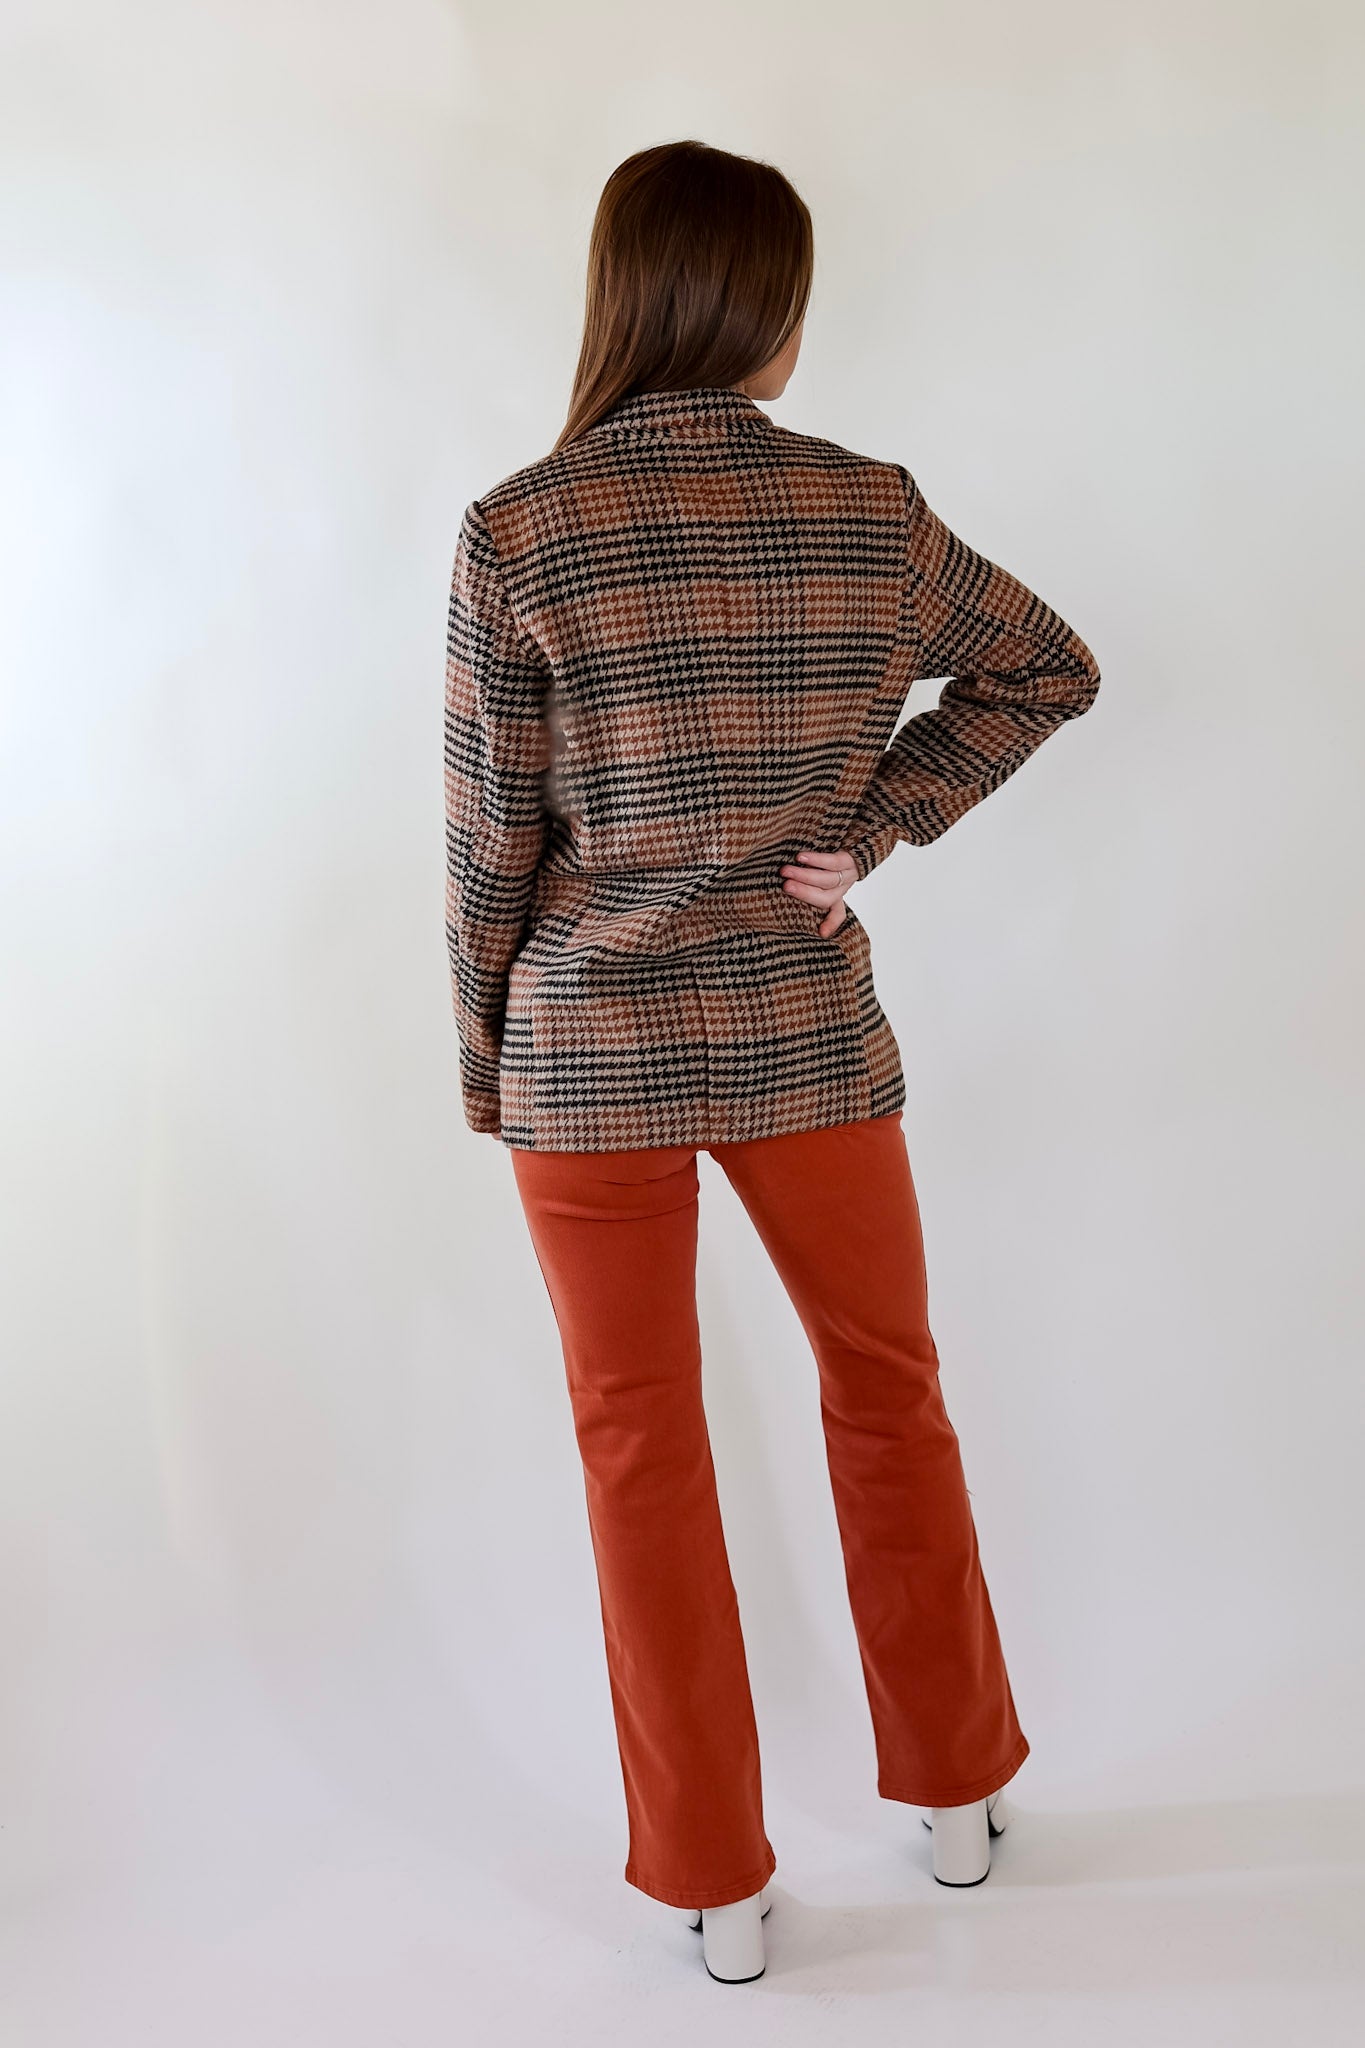 Magical Feeling Houndstooth Blazer with Long Sleeves in Rust Mix - Giddy Up Glamour Boutique